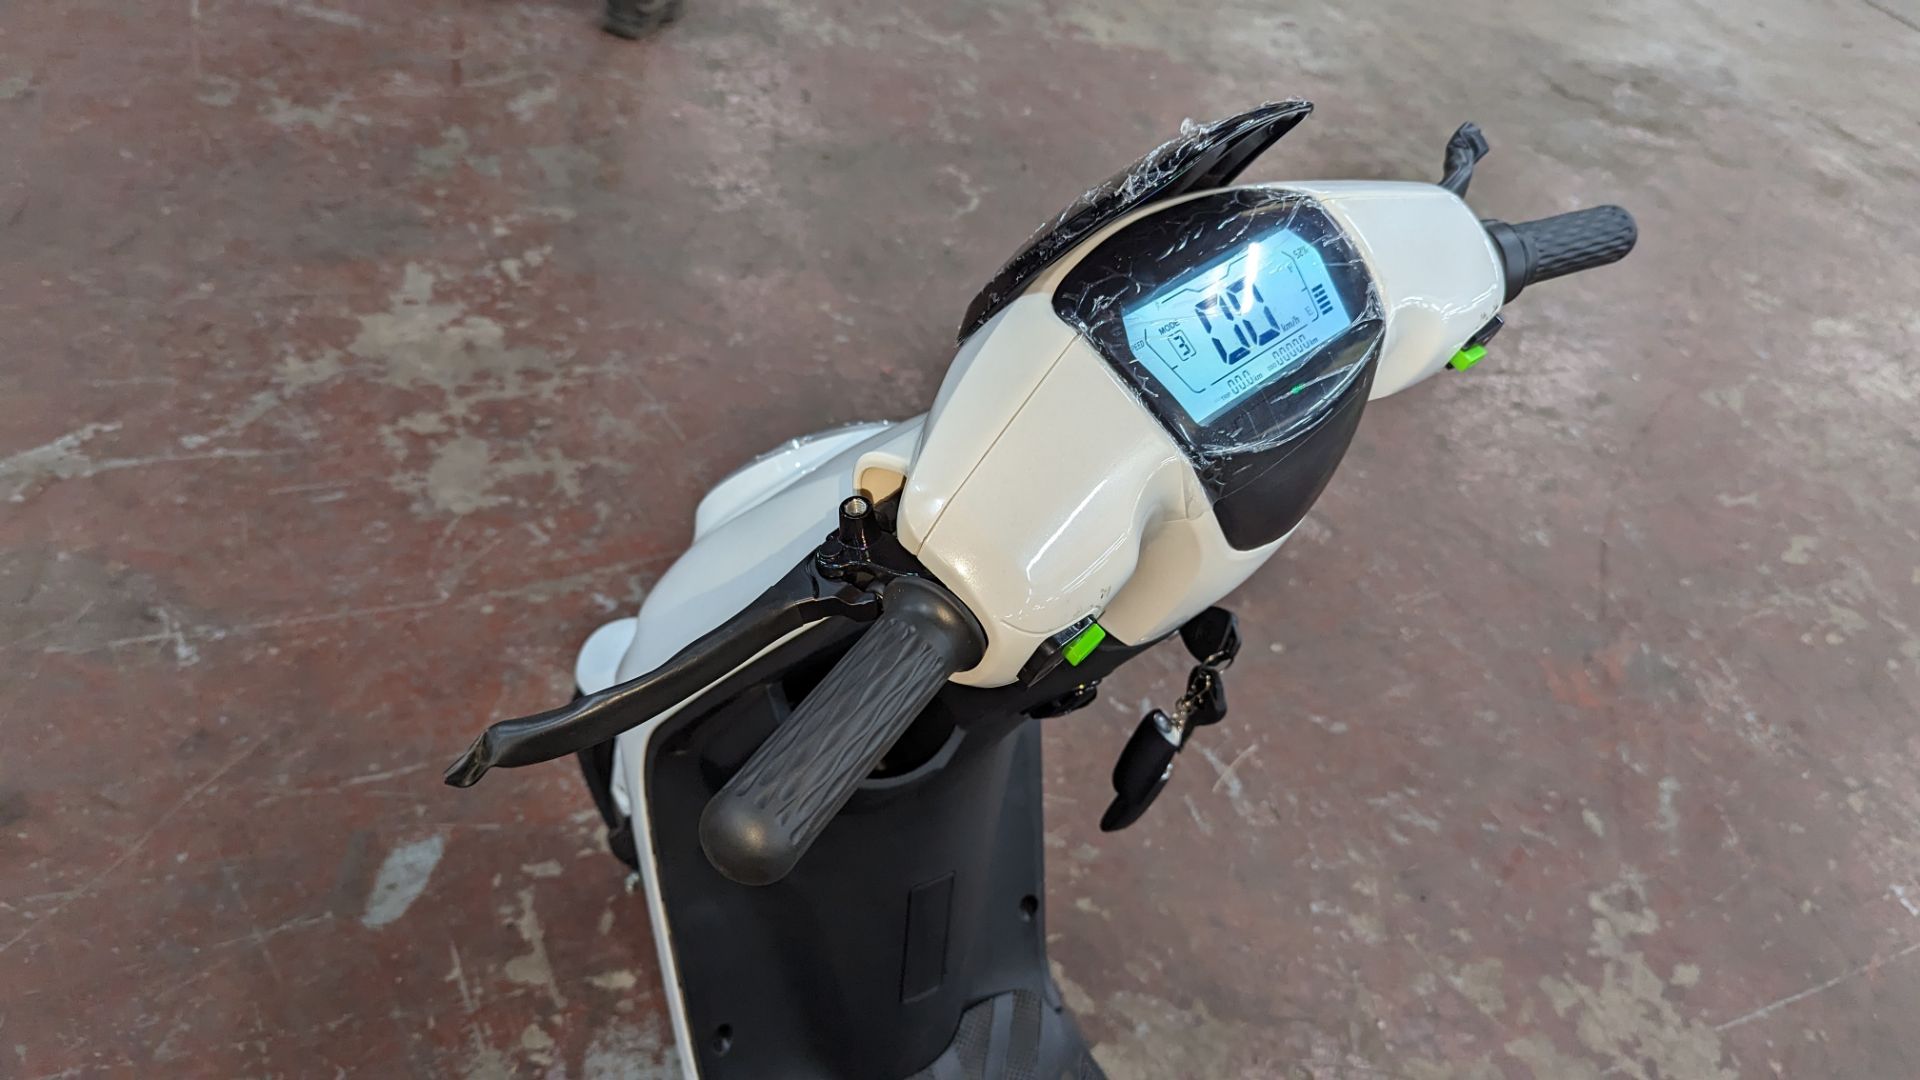 Model 18 Electric Bike: Zero (0) recorded miles, white body with black detailing, insulated box moun - Image 7 of 11